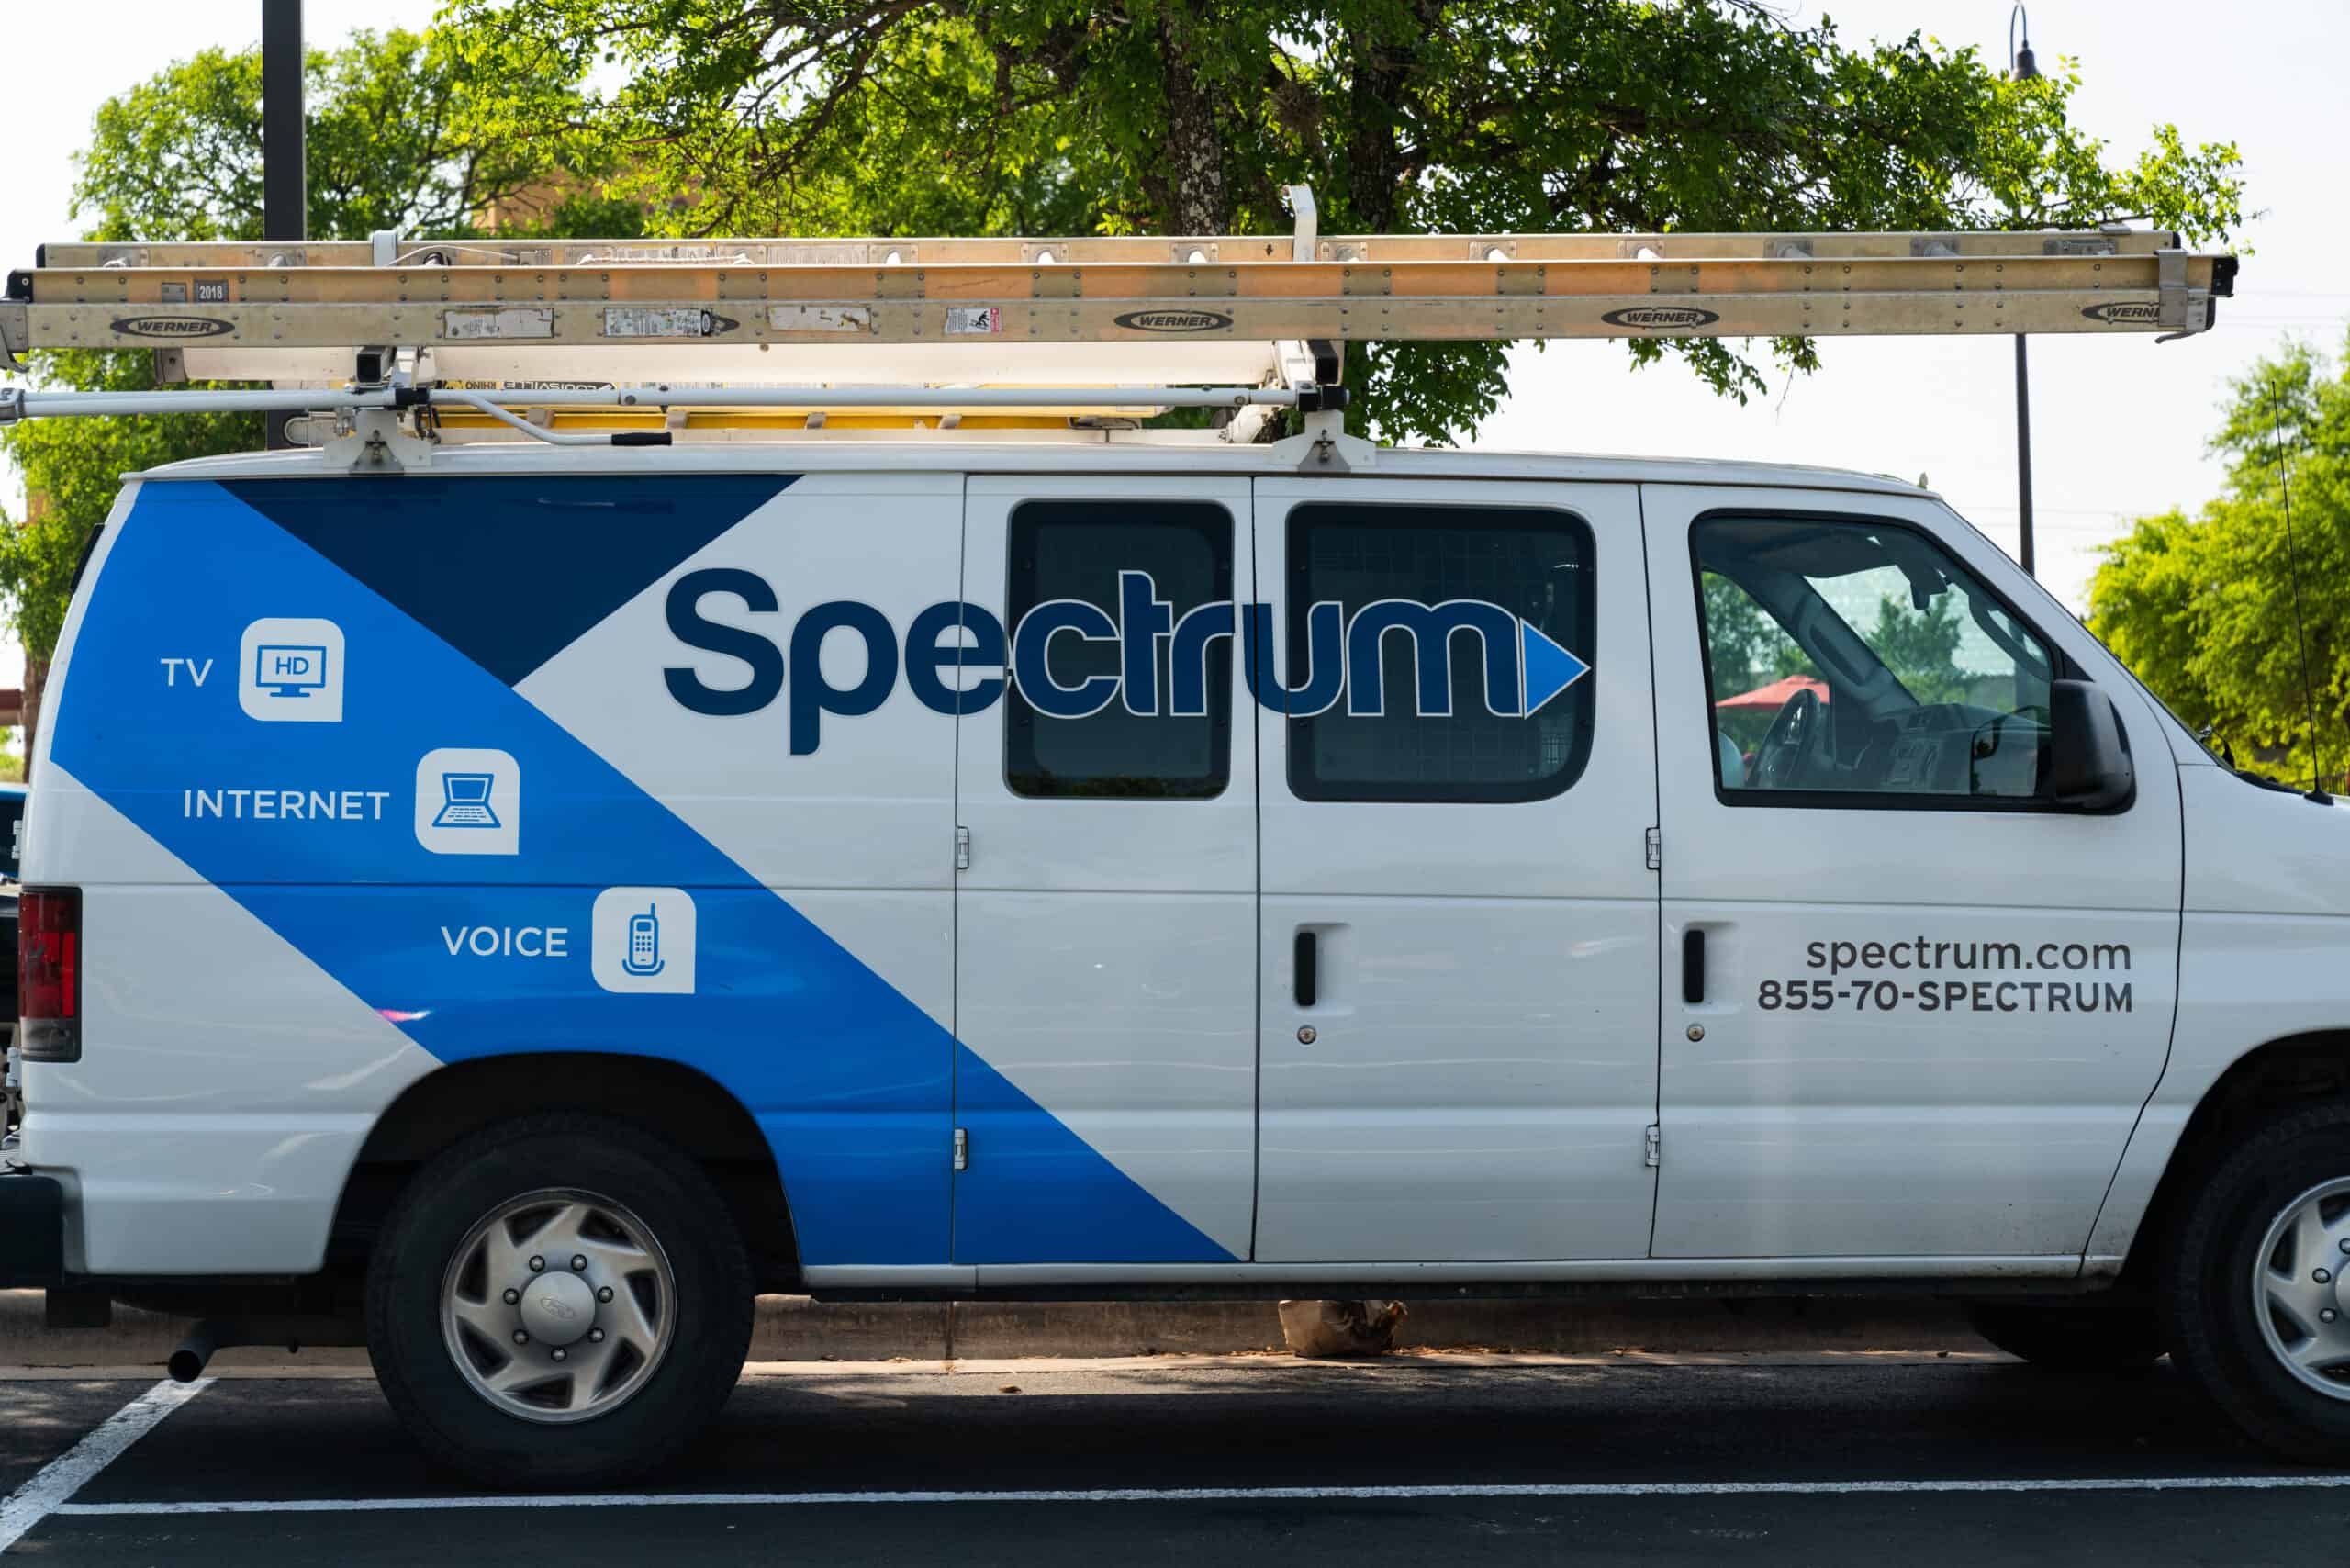 Charter Spectrum... by Tony Webster from Minneapolis, Minnesota, United States